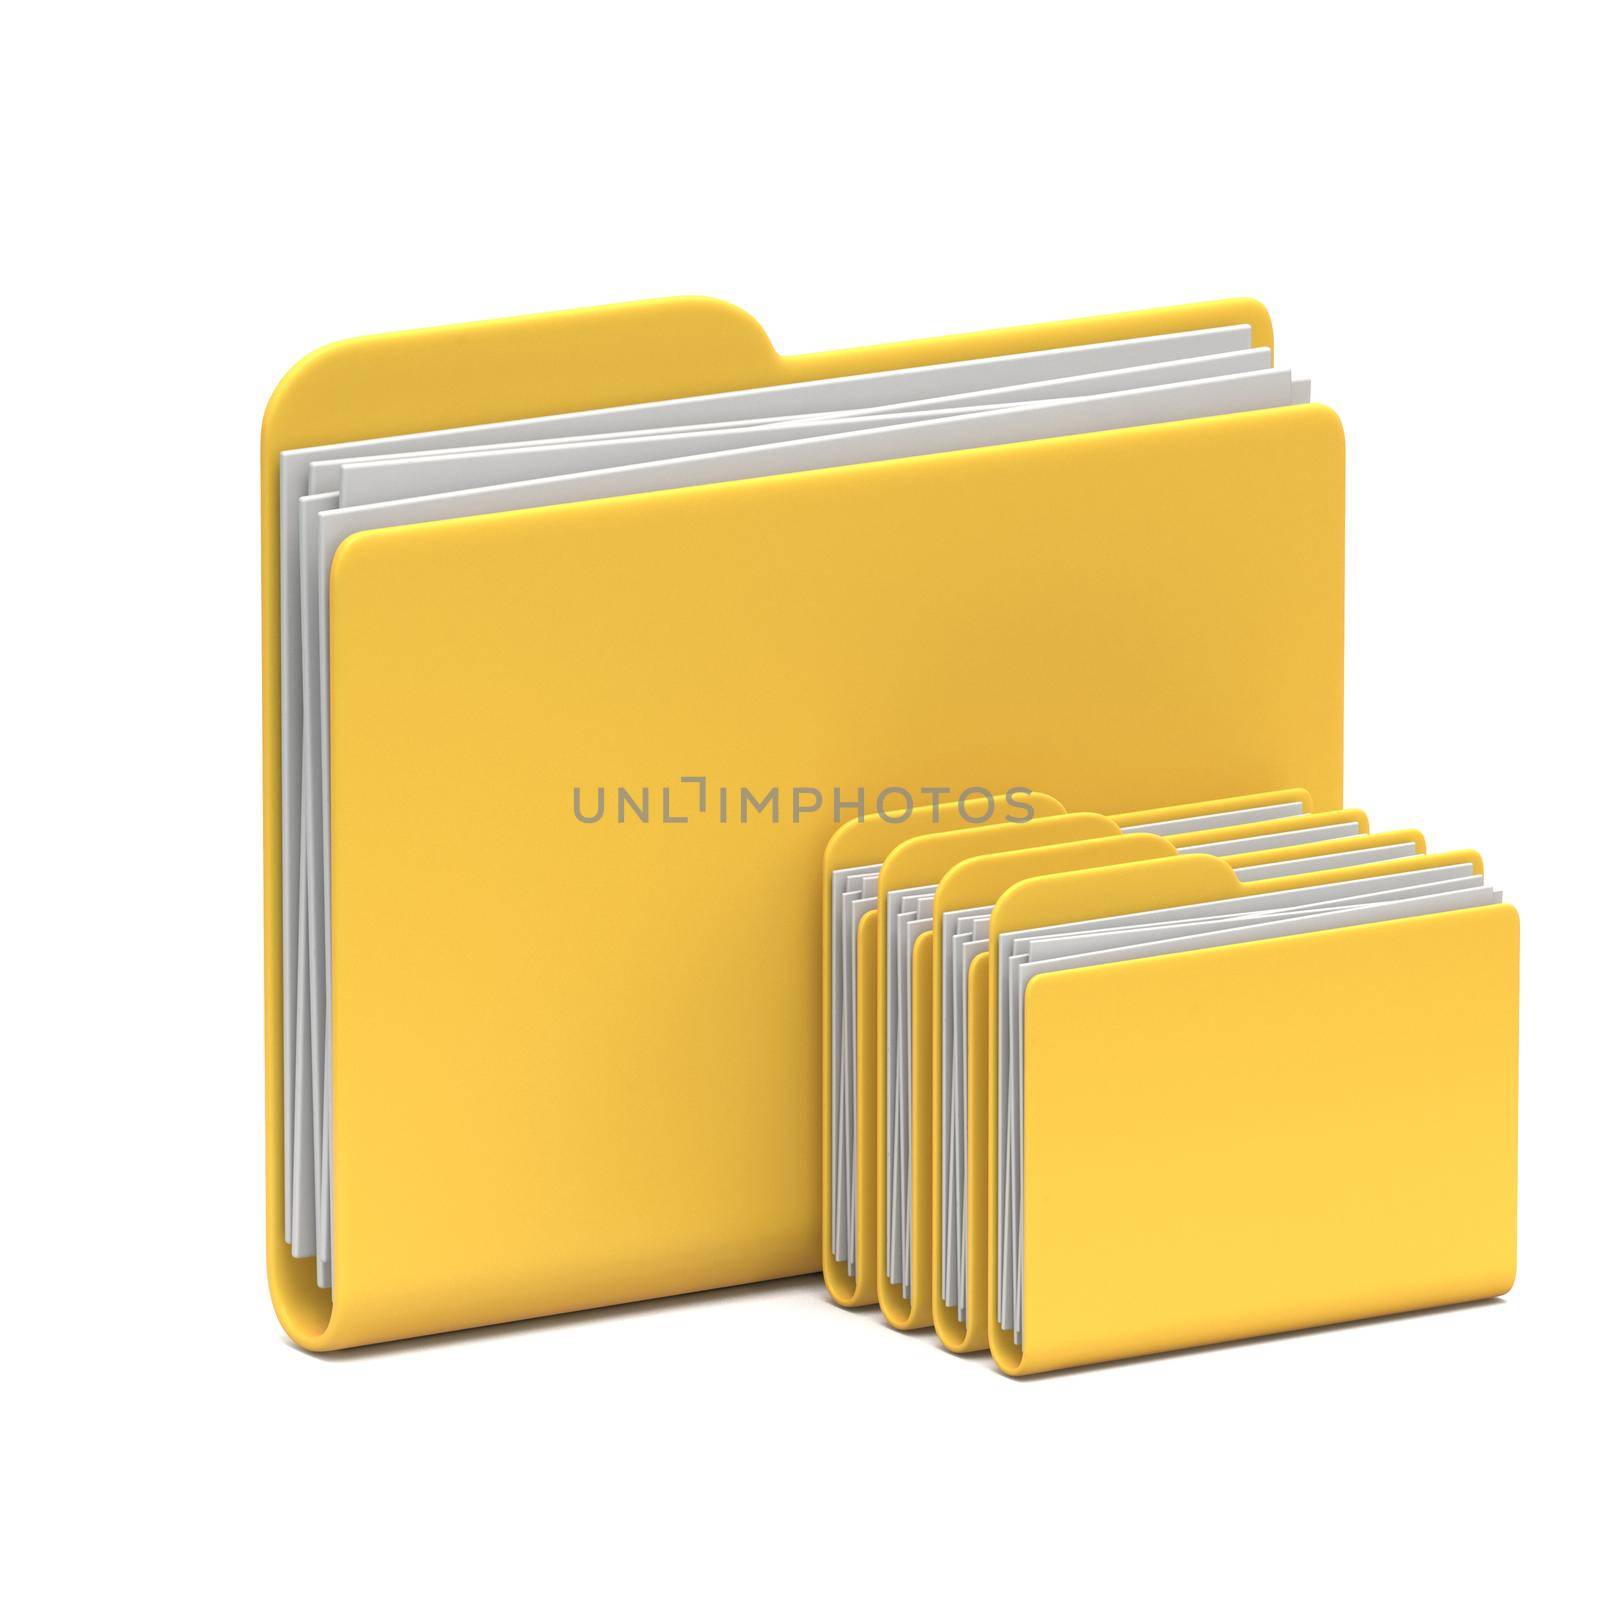 Yellow folder icon parent directory 3D rendering illustration isolated on white background